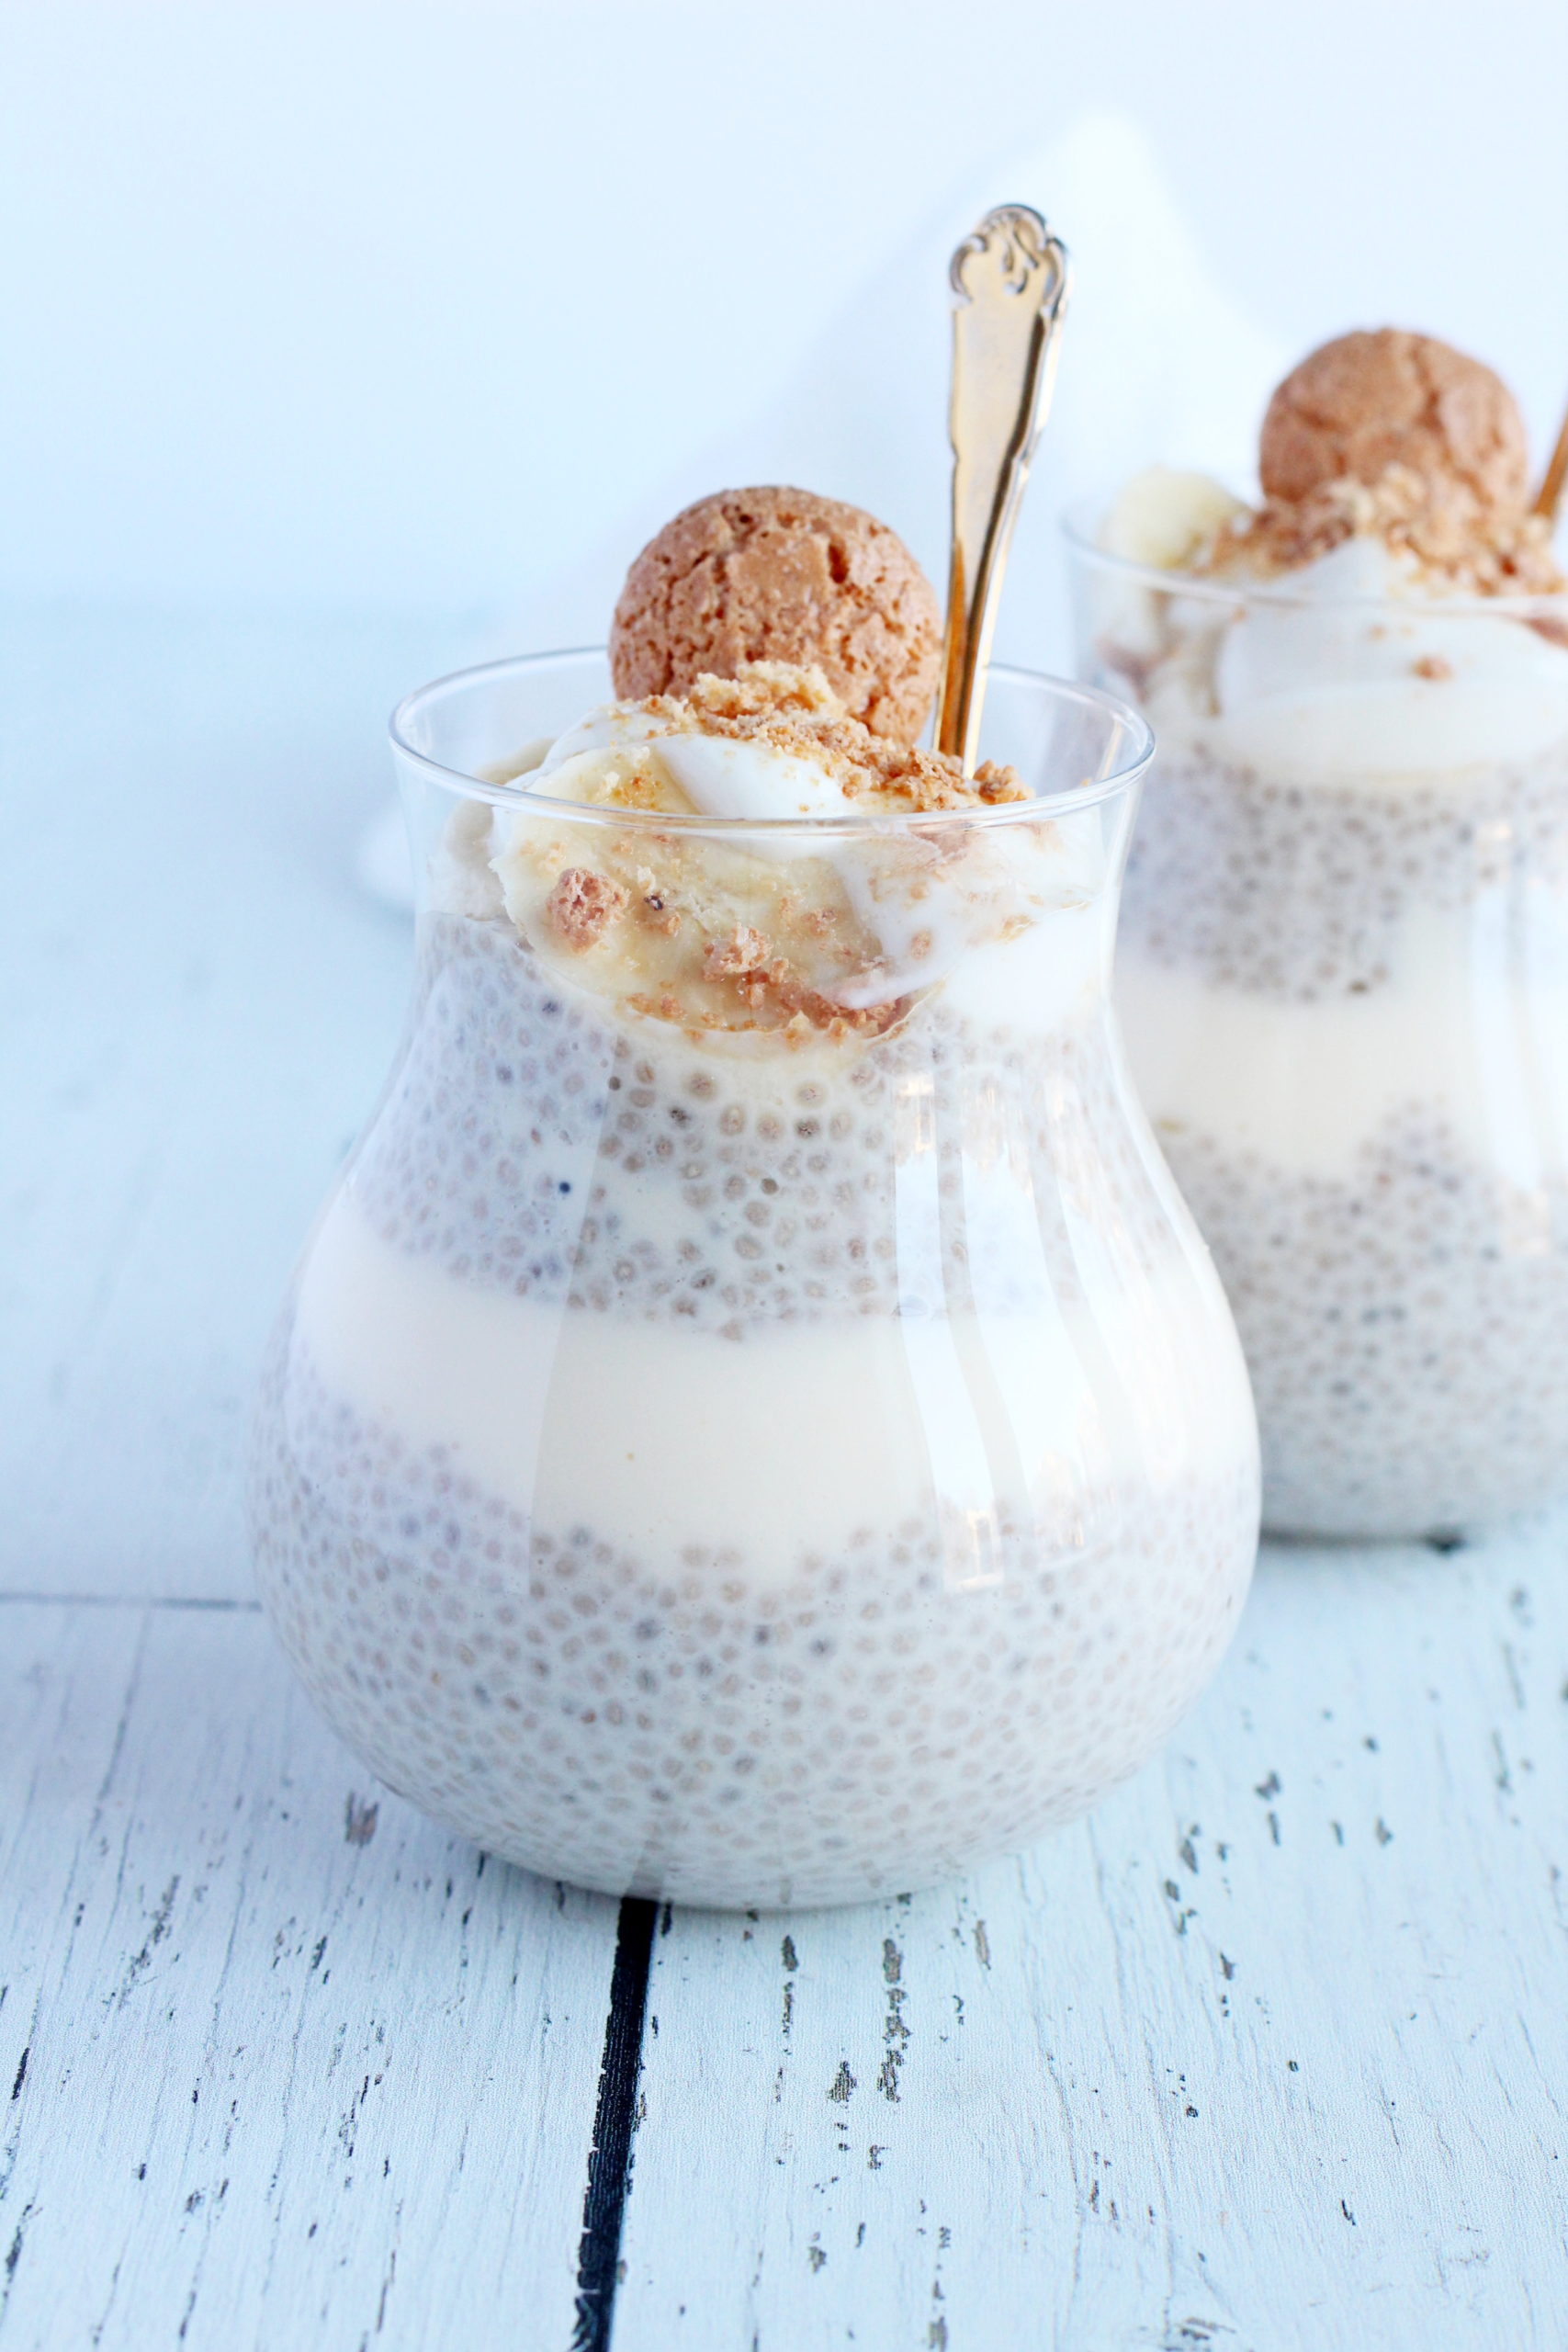 chia pudding with bananas and amaretto cookies